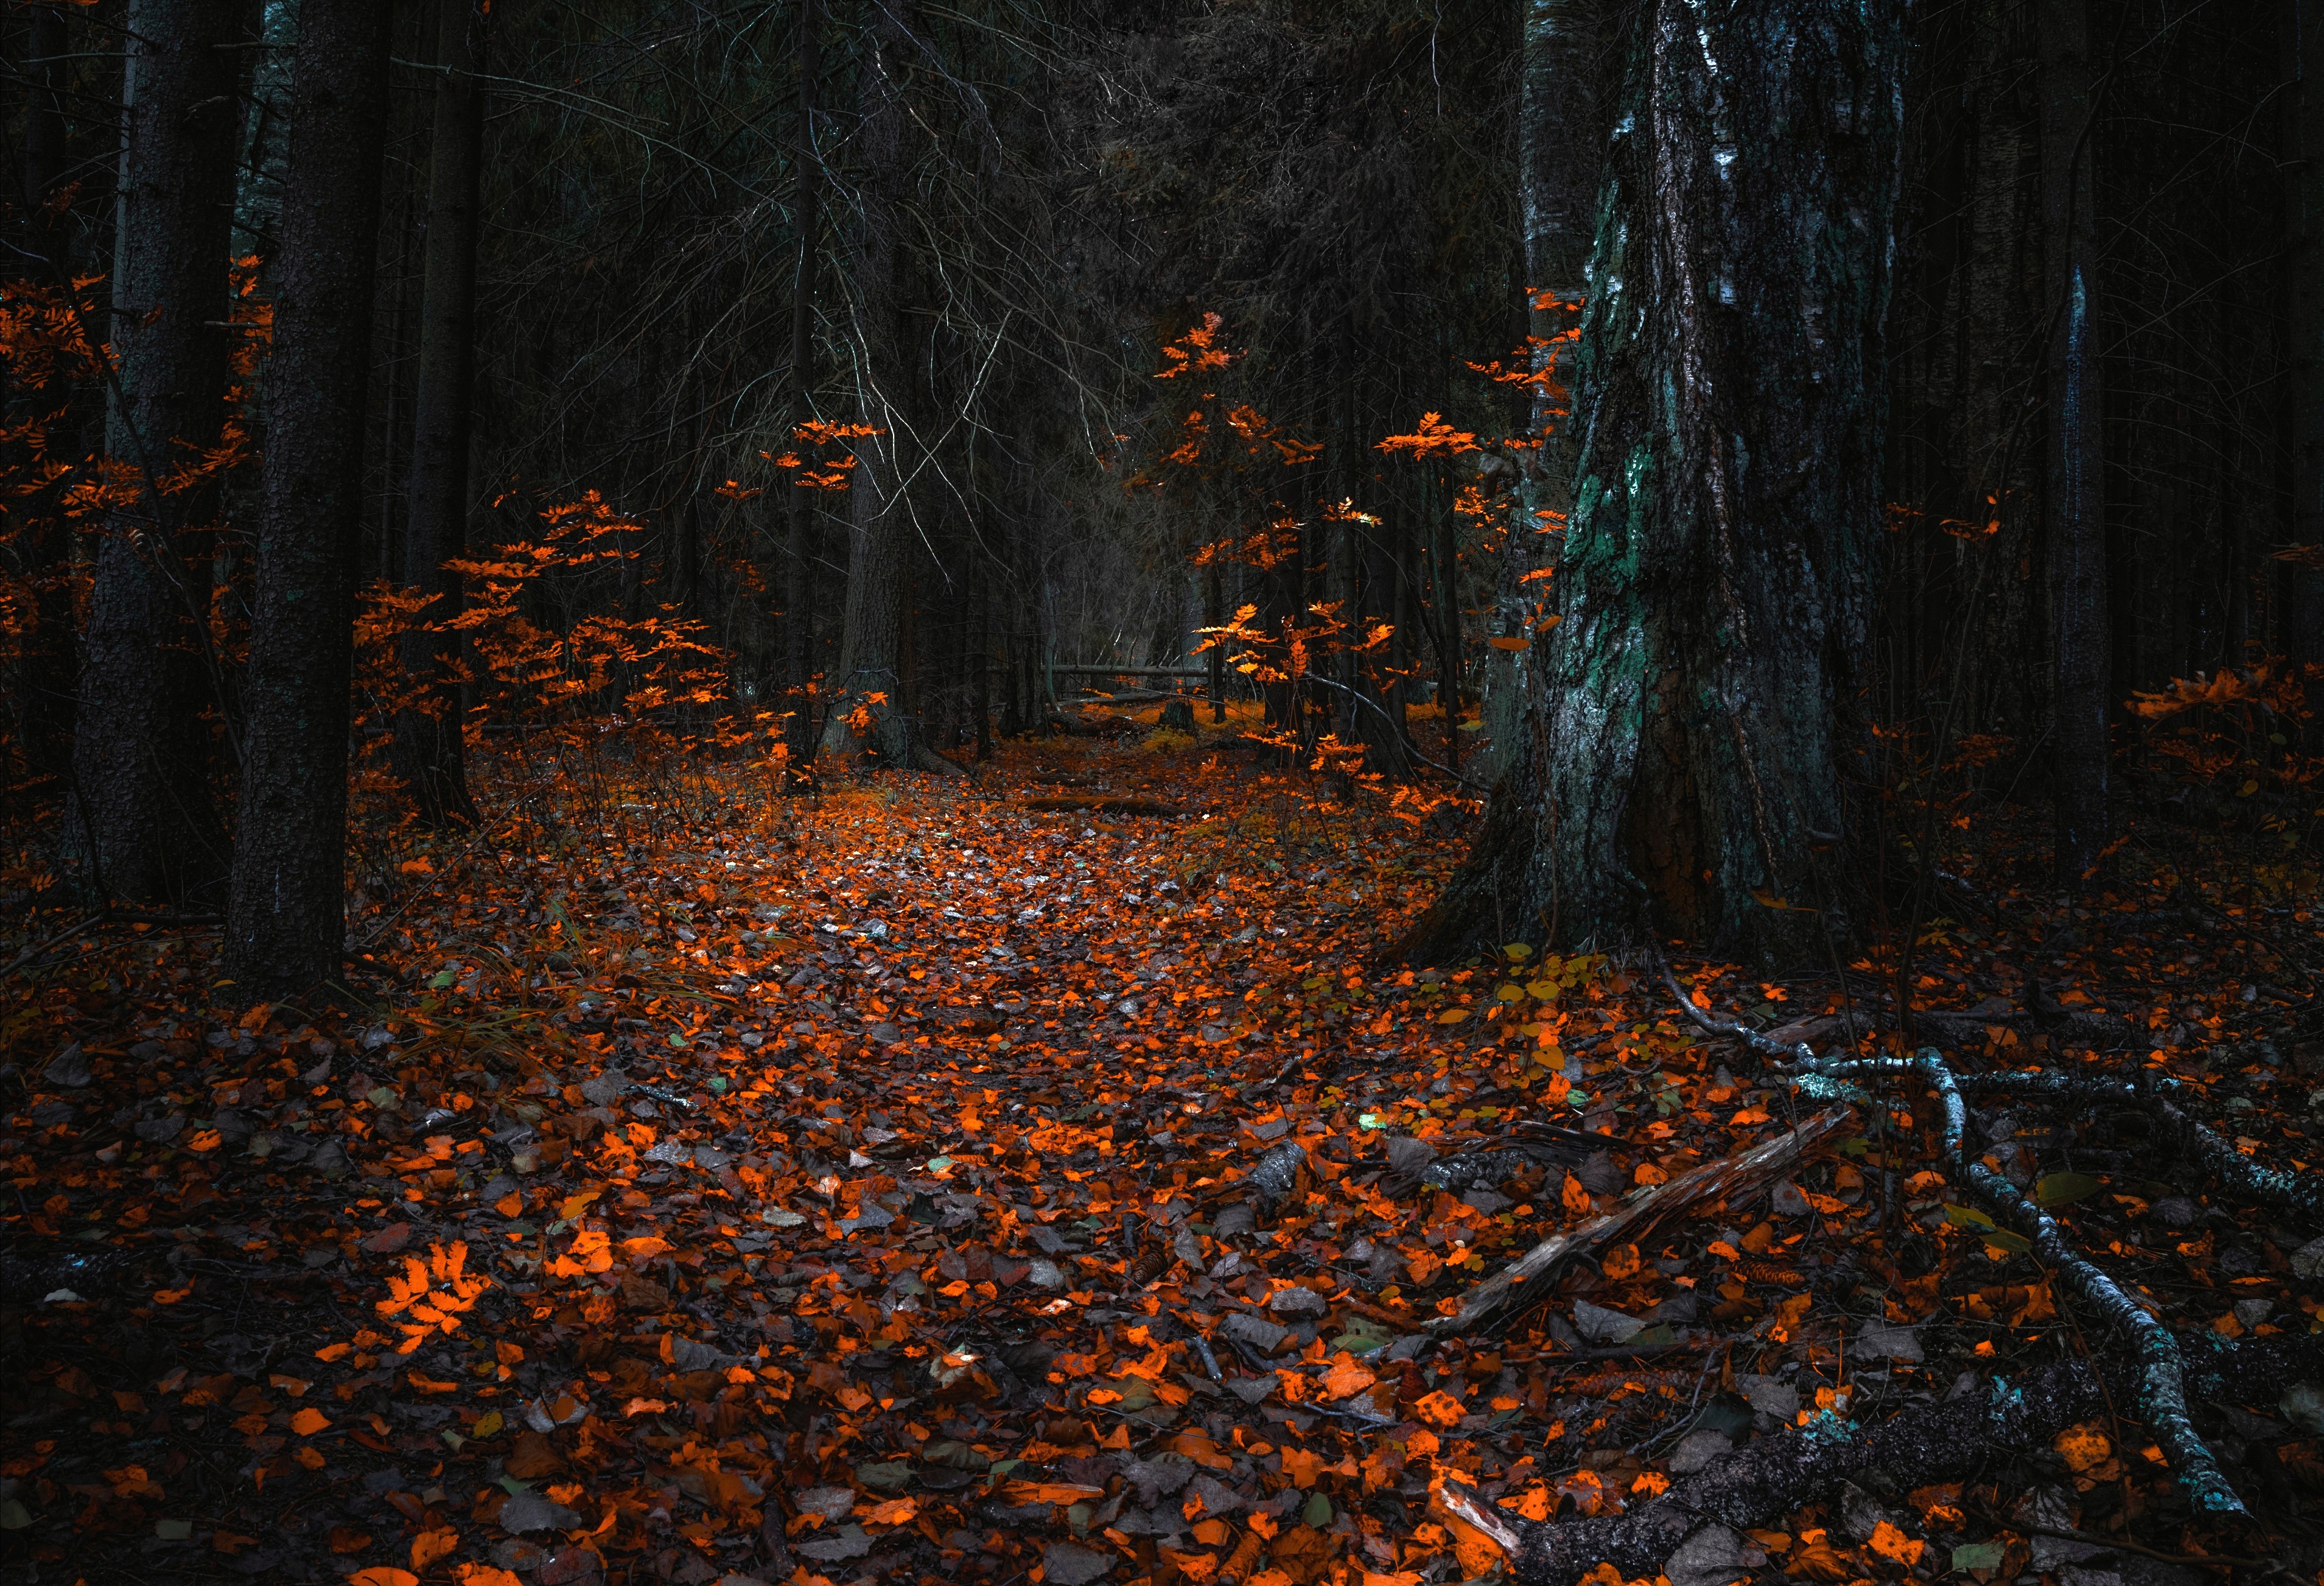 Fallen dry leaves in a gloomy forest